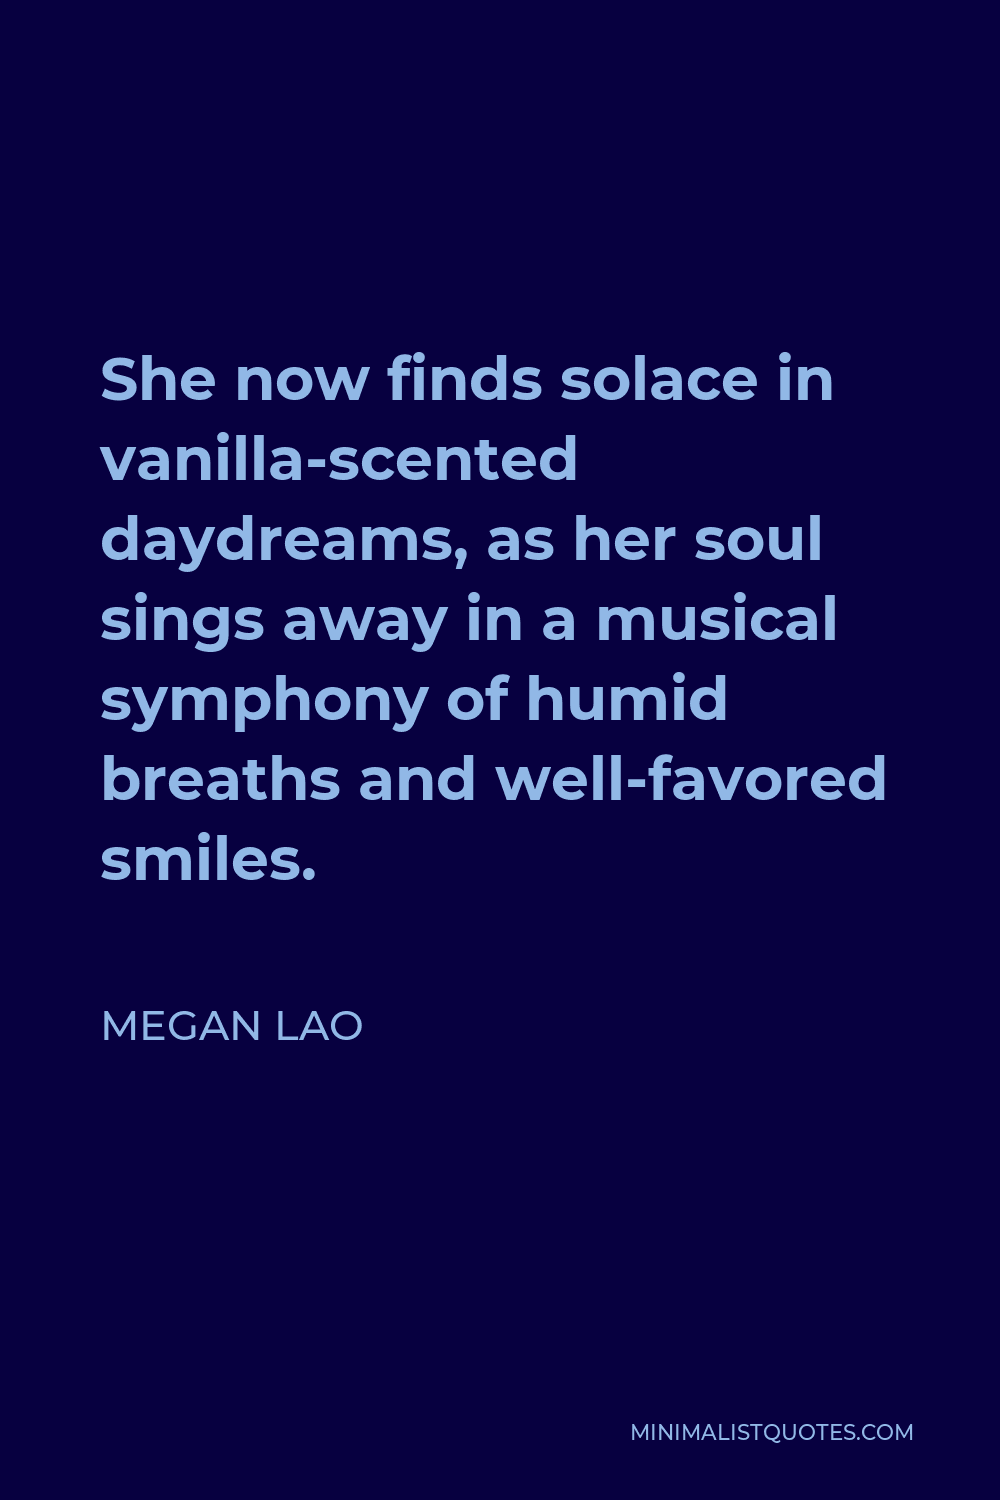 Megan Lao Quote - She now finds solace in vanilla-scented daydreams, as her soul sings away in a musical symphony of humid breaths and well-favored smiles.